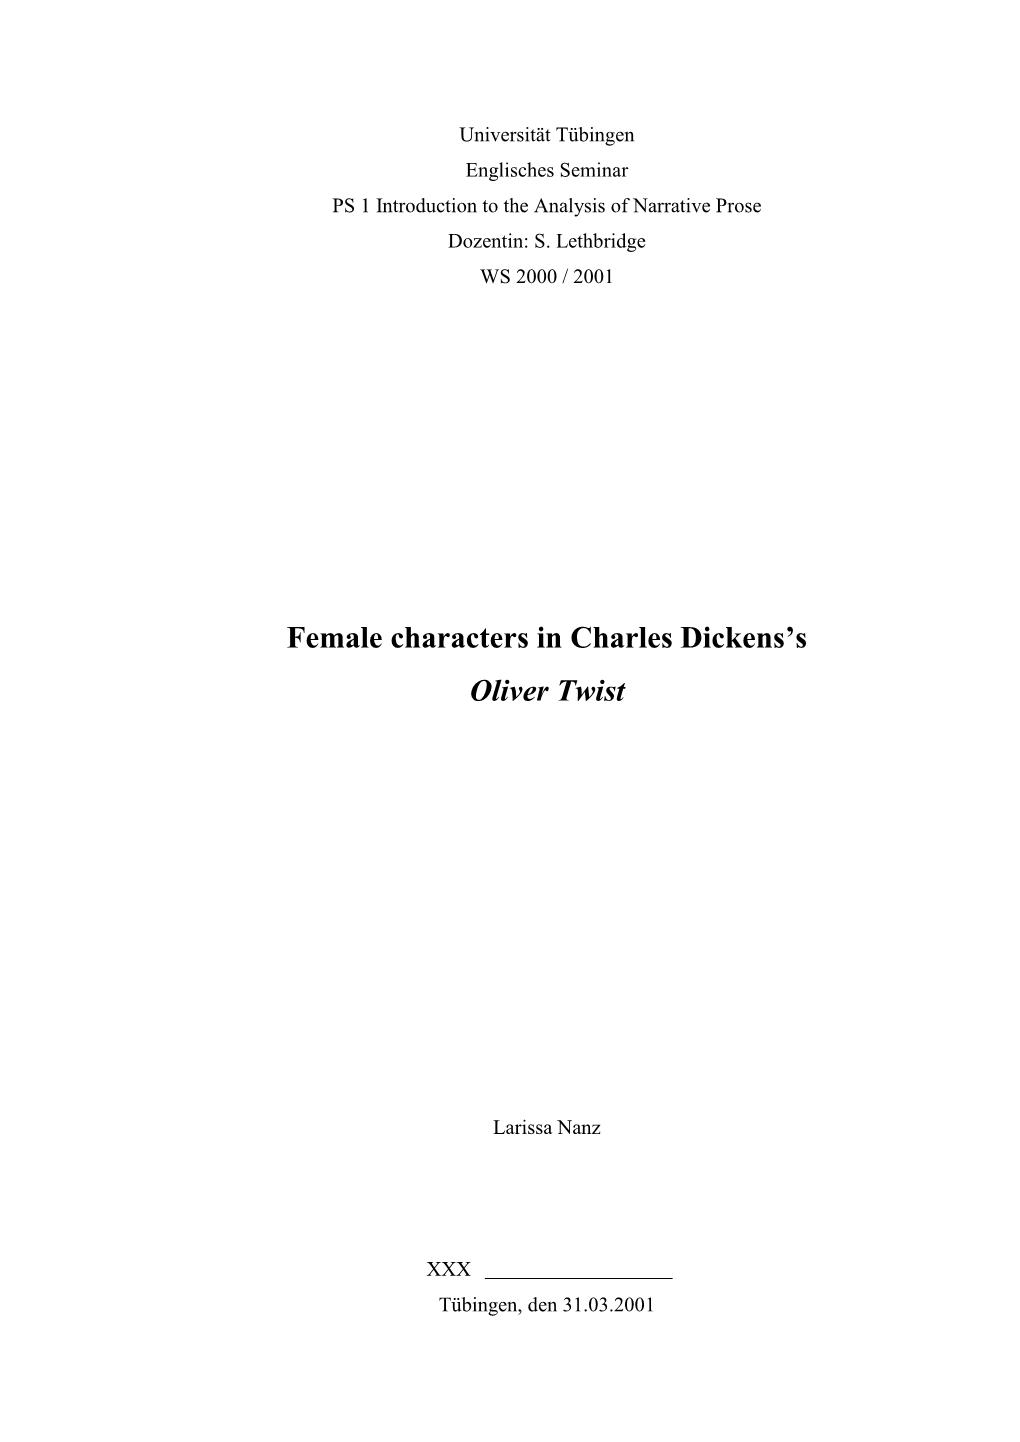 Female Characters in Charles Dickens's Oliver Twist